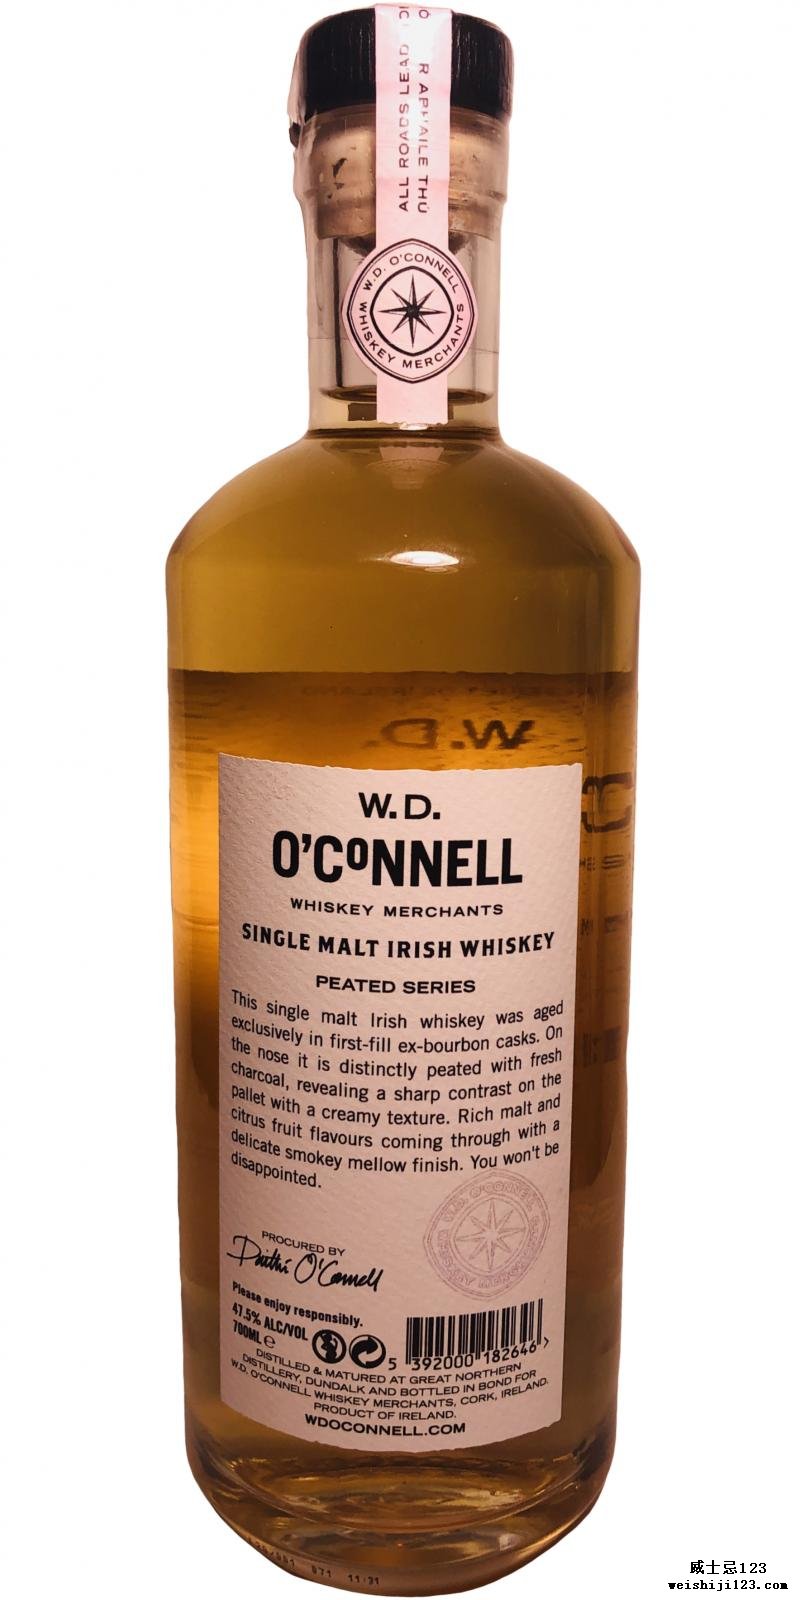 W.D. O'Connell Bill Phil - Peated Series WDO